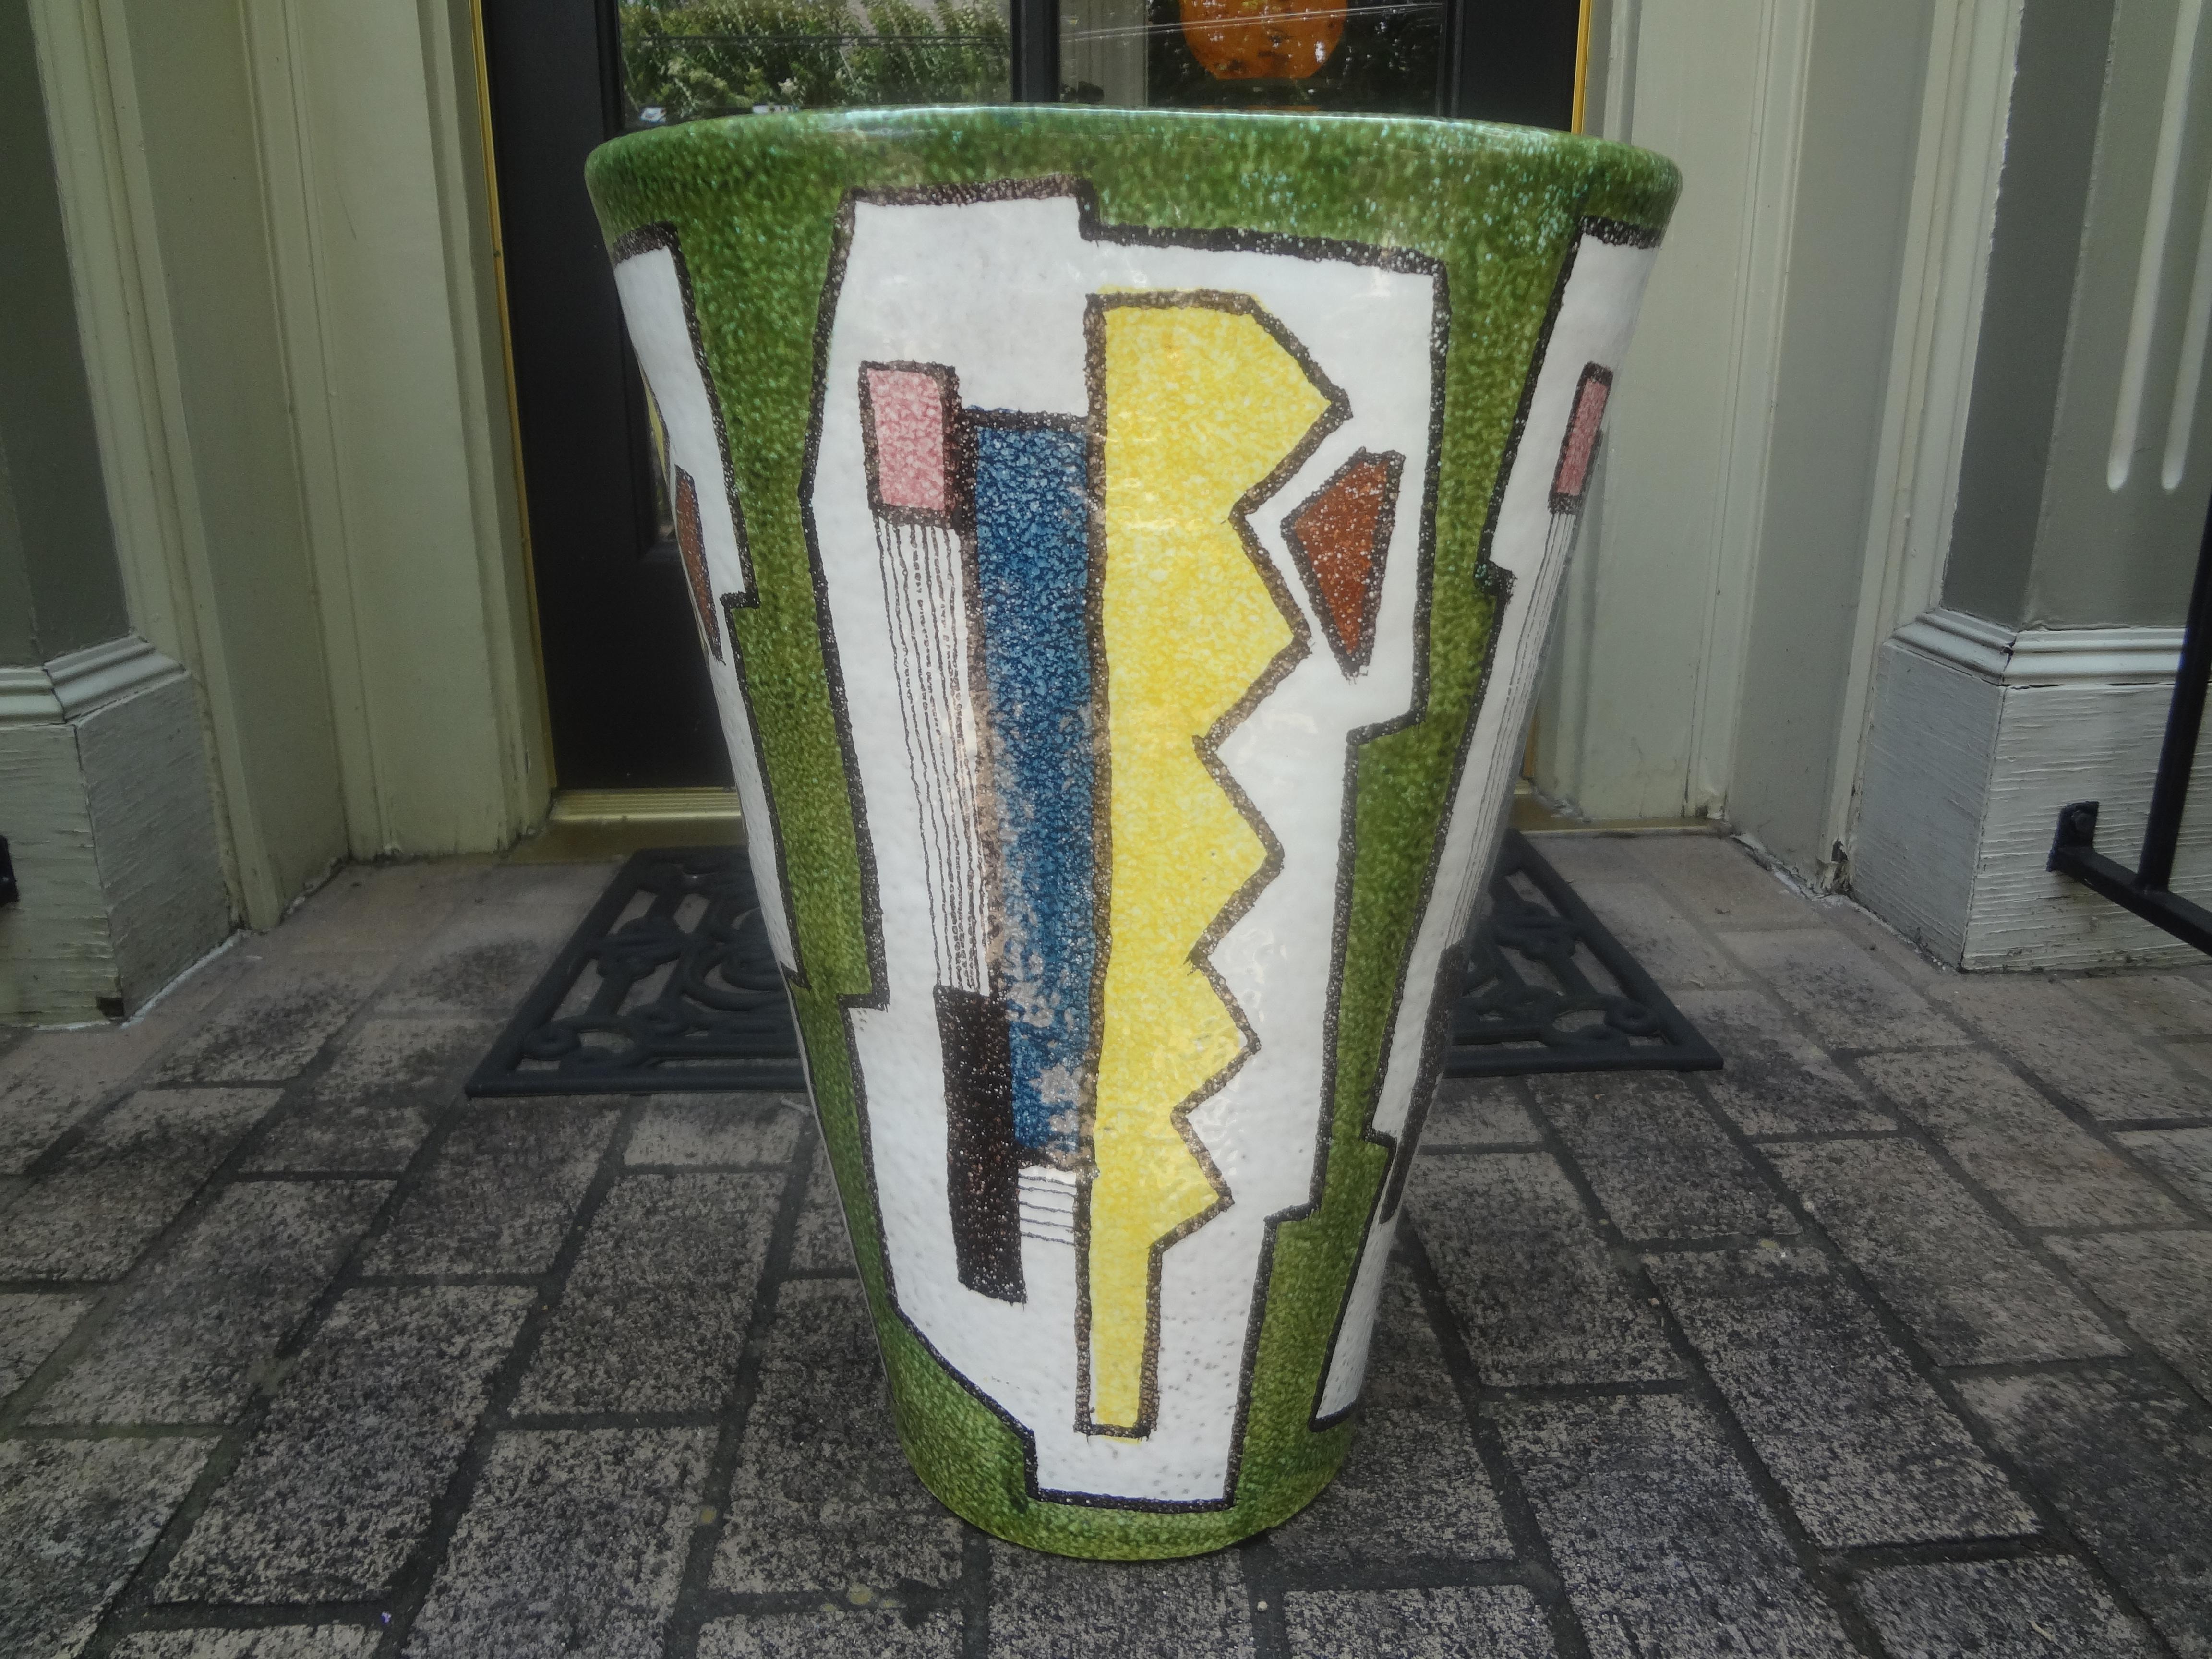 Italian Modernist Glazed Ceramic Umbrella Stand.
This stunning Italian Modernist umbrella stand or vase was realized in Italy, circa 1970. This piece features a bold geometric pattern of blue, white, yellow, pink, green and black in a beautiful